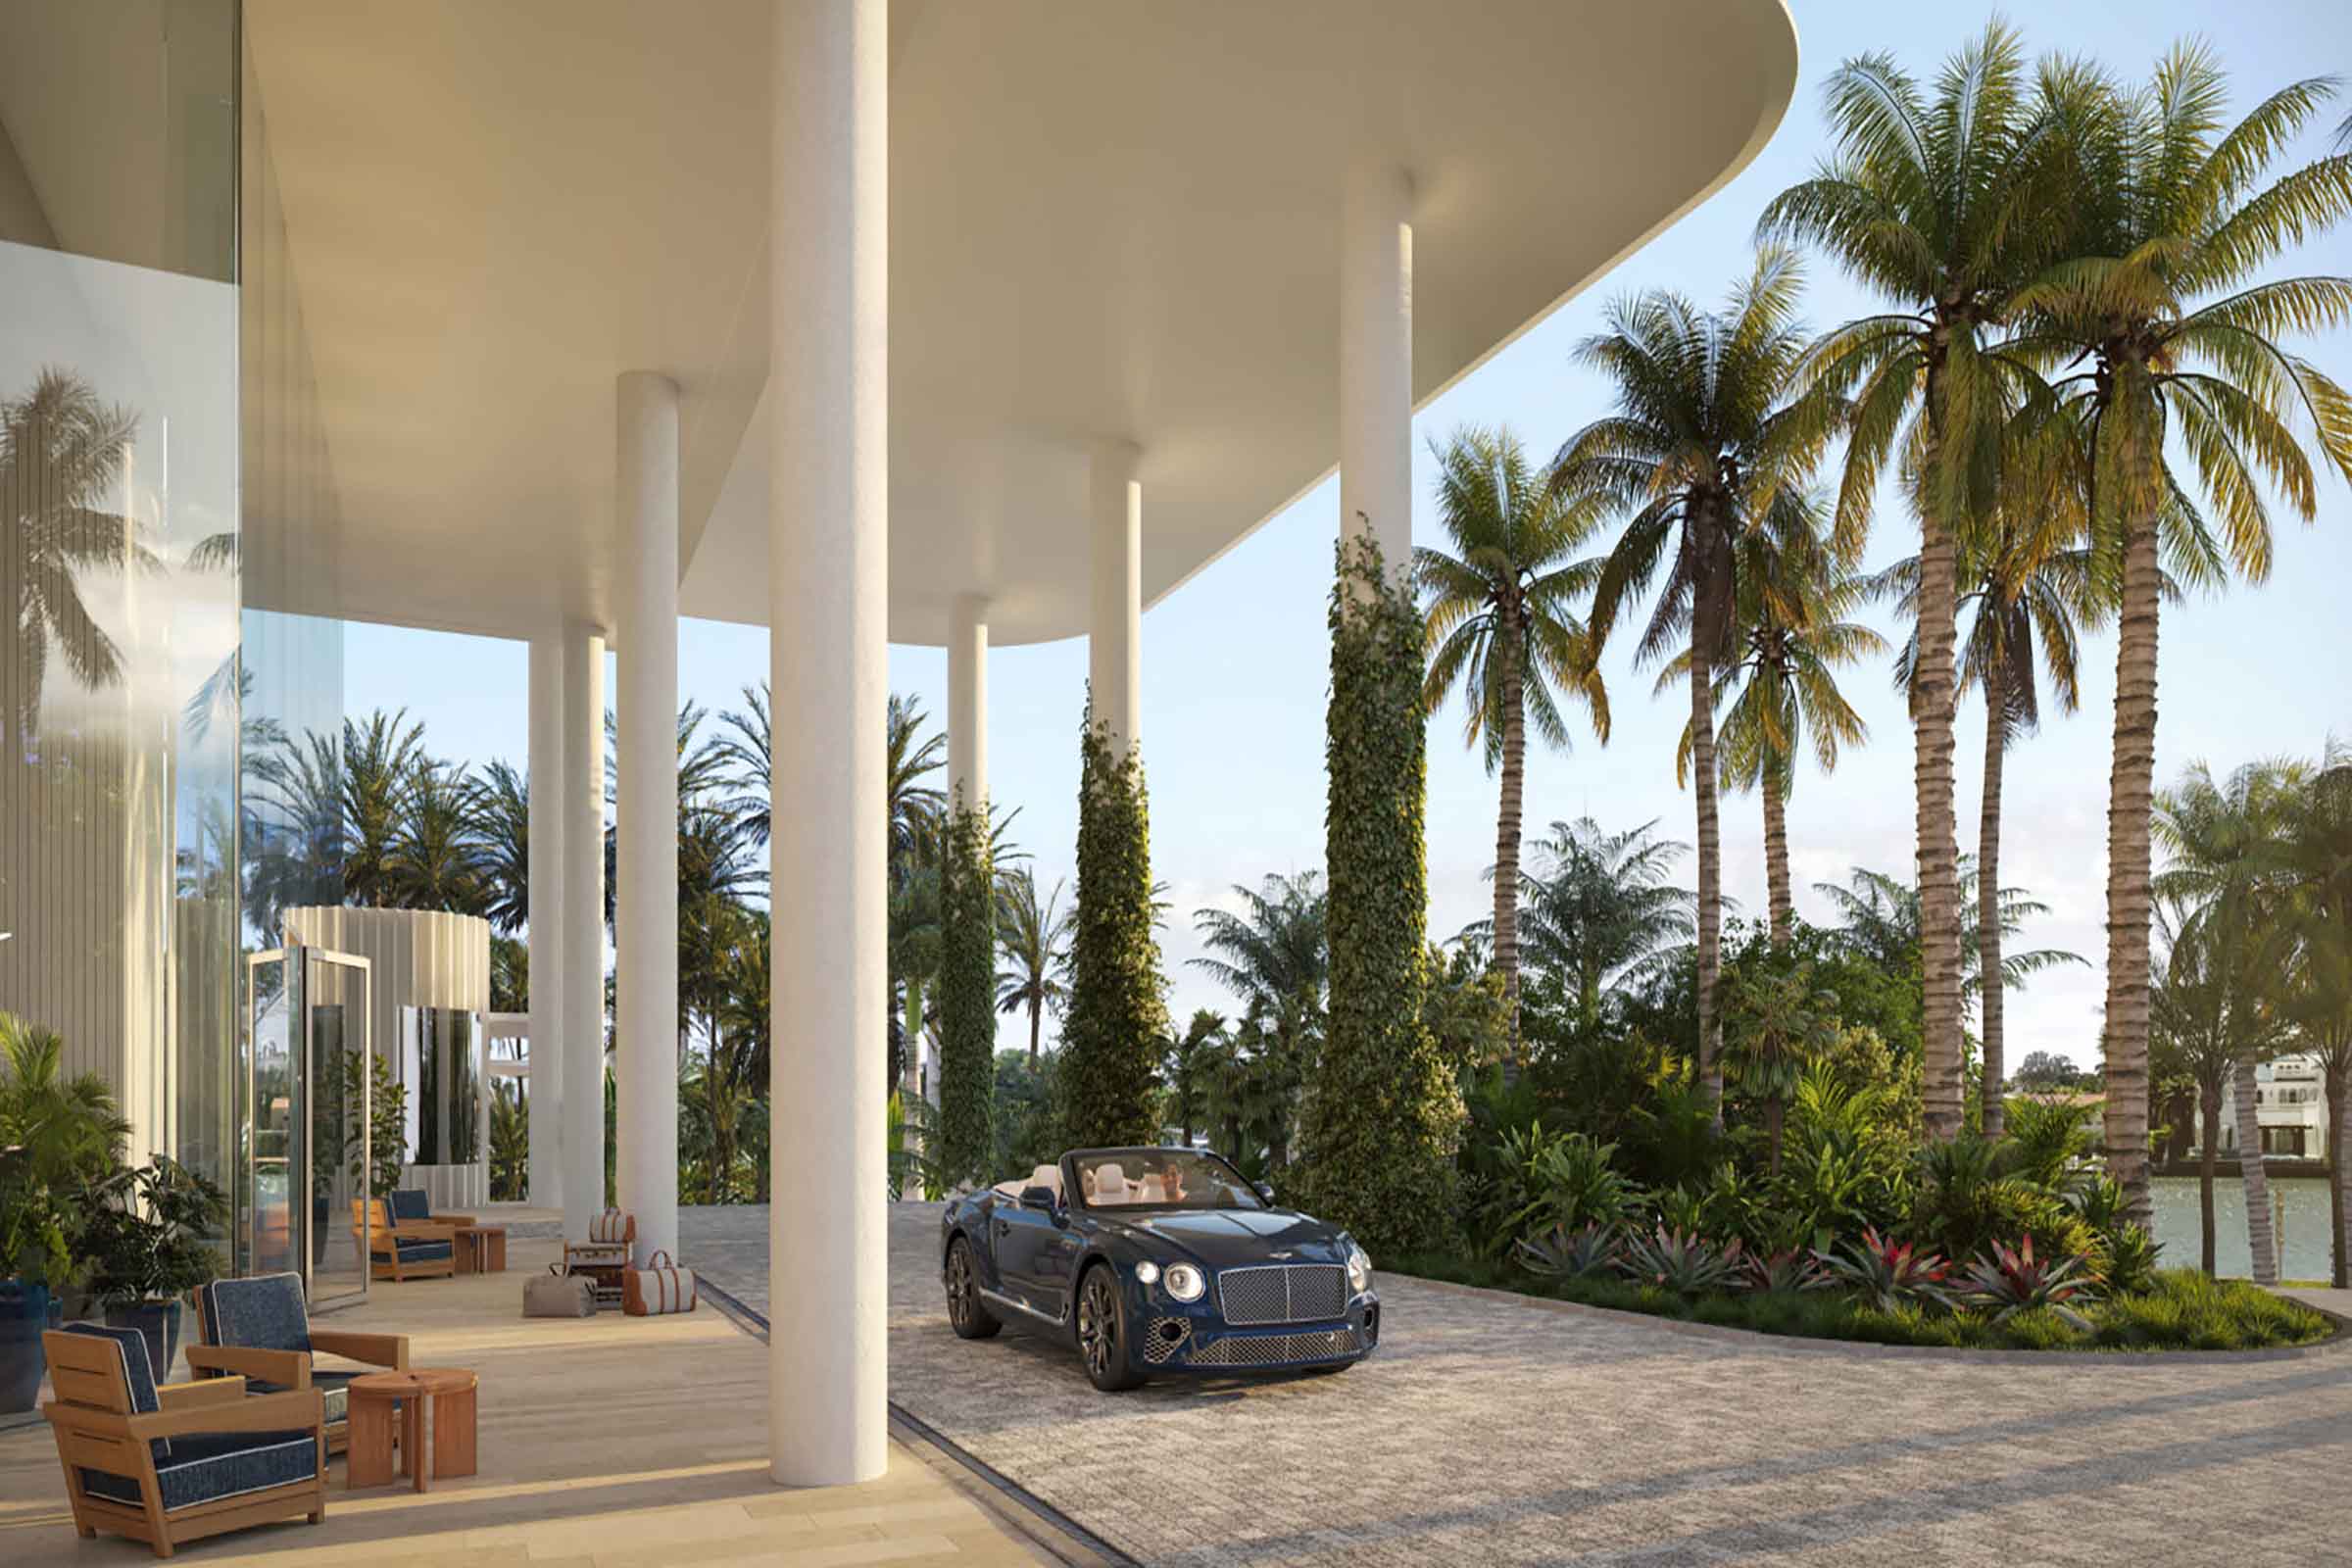 The Perigon Miami Beach Amenities Invite You To Revel In Sophisticated Tranquility